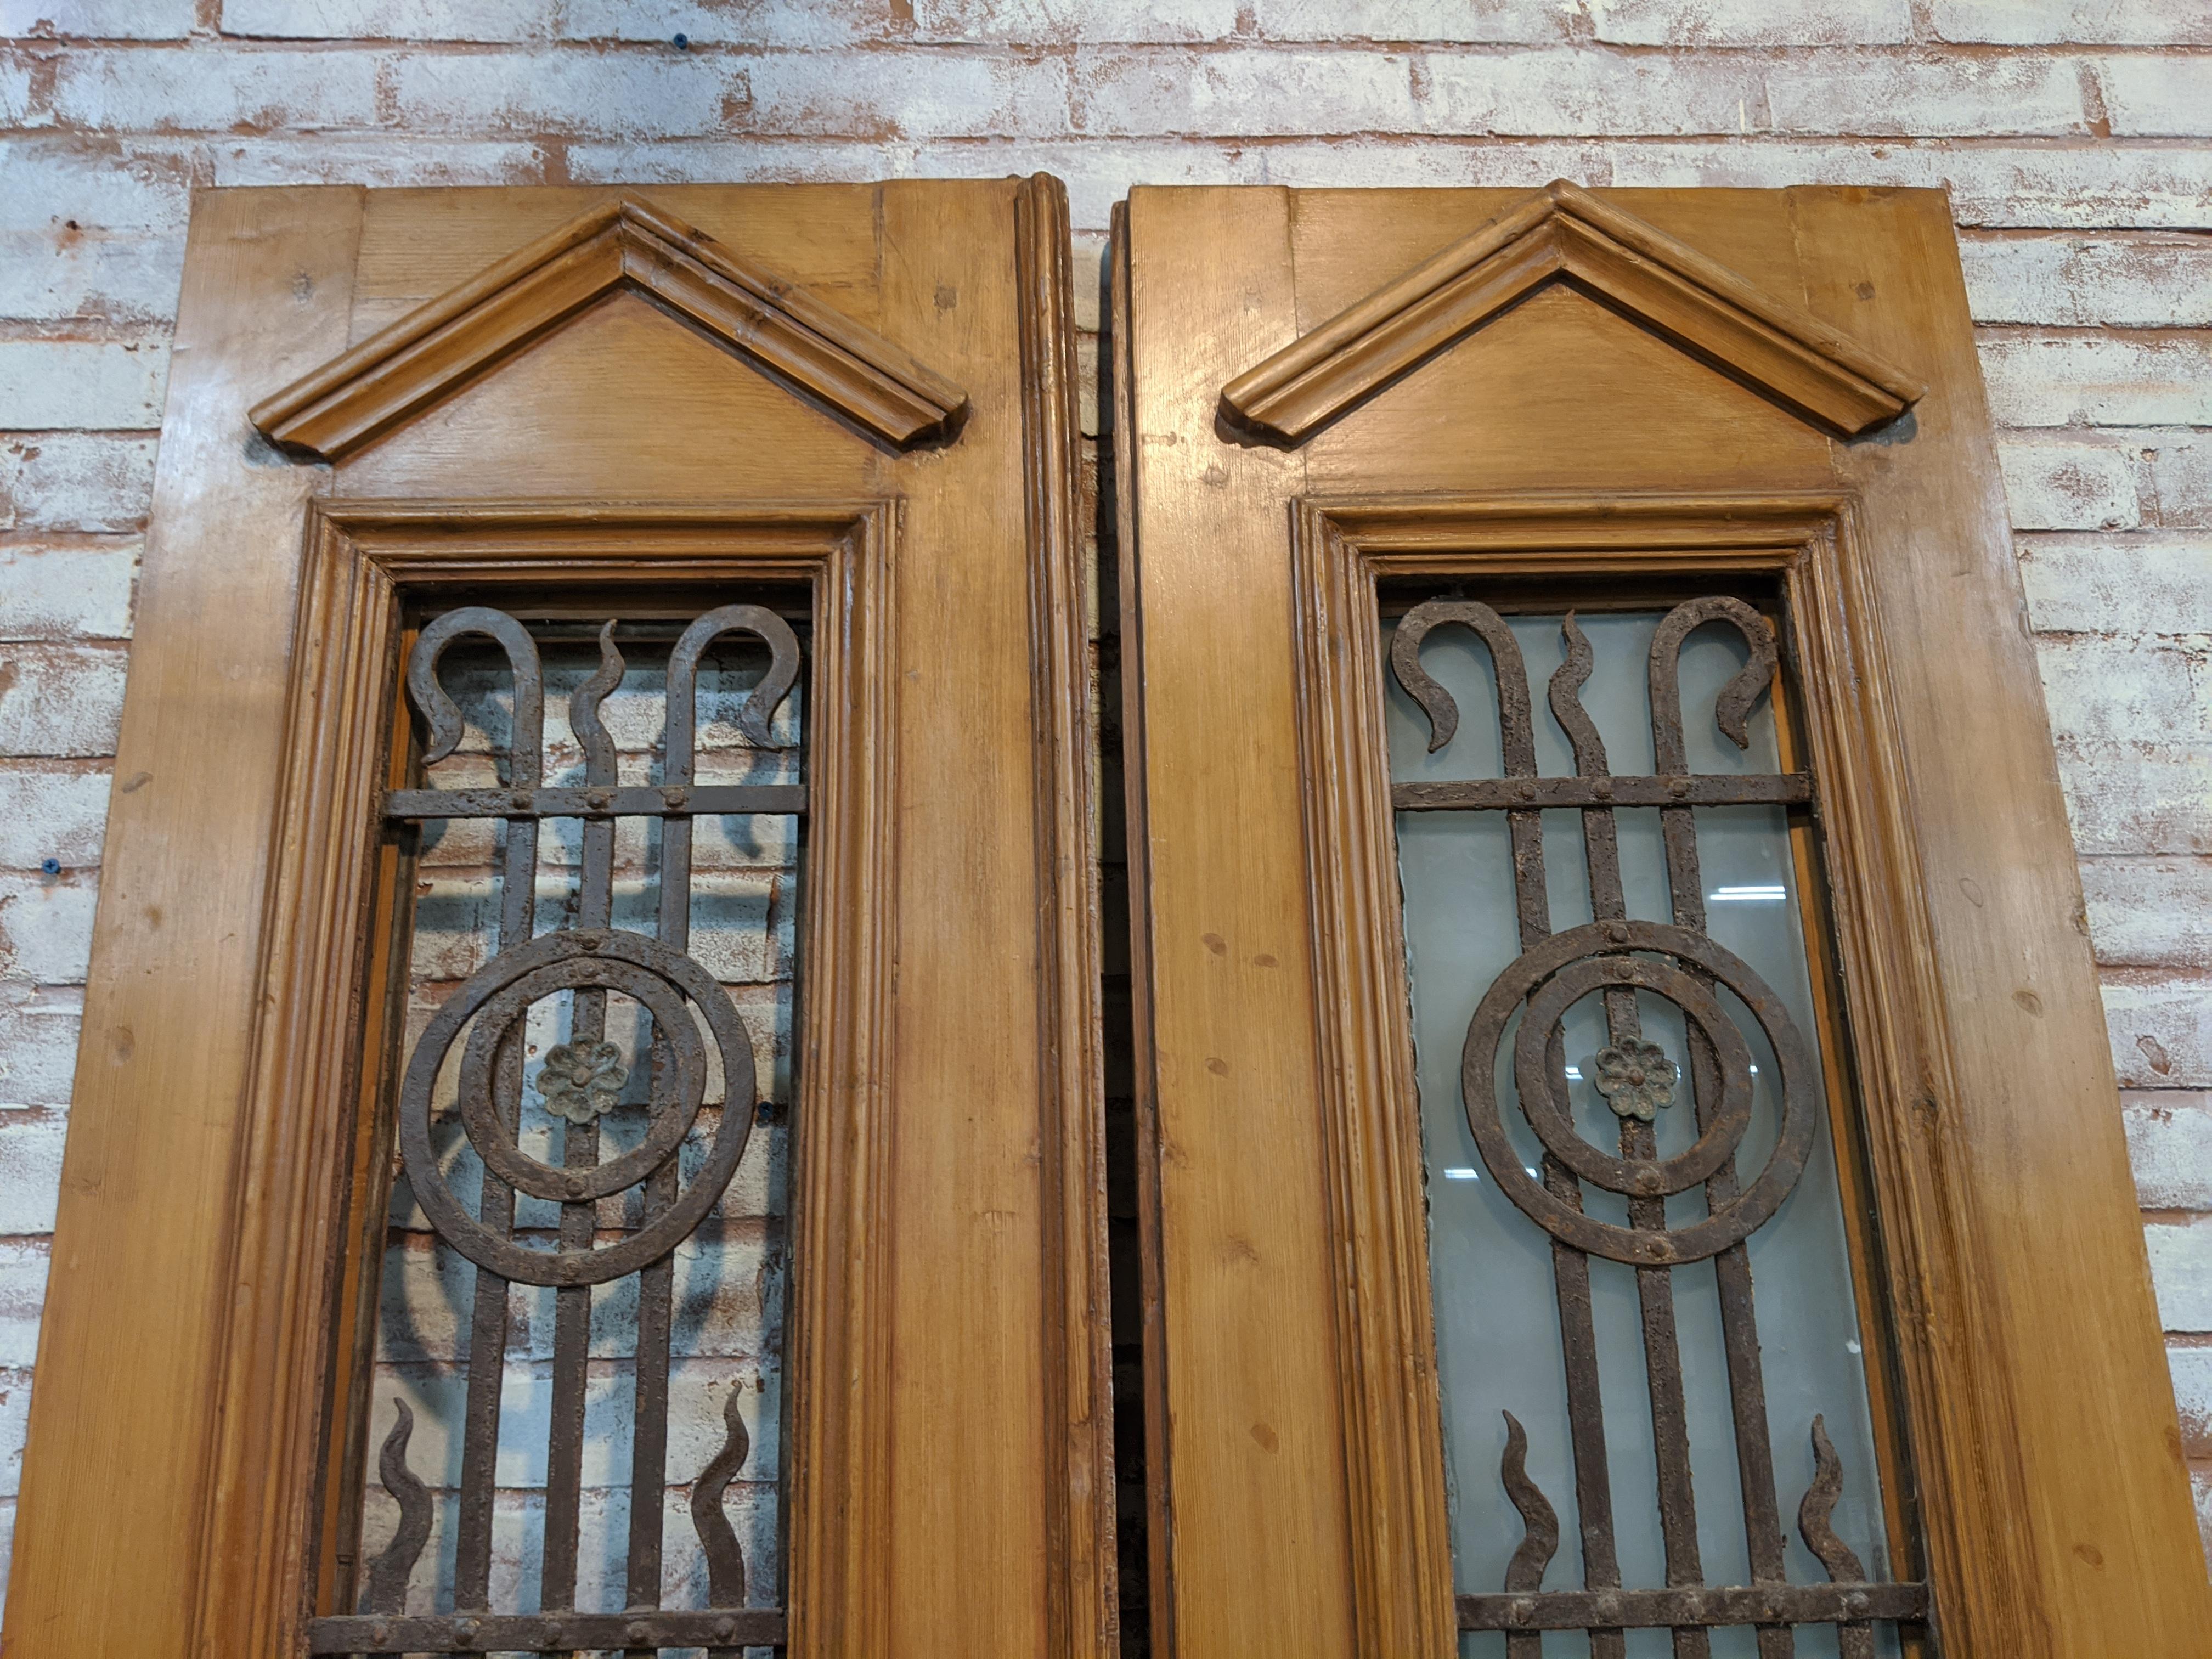 Pair of vintage doors from Egypt. All paint has been removed and doors have a waxed finish. Original ironwork also cleaned. Each door measures 20